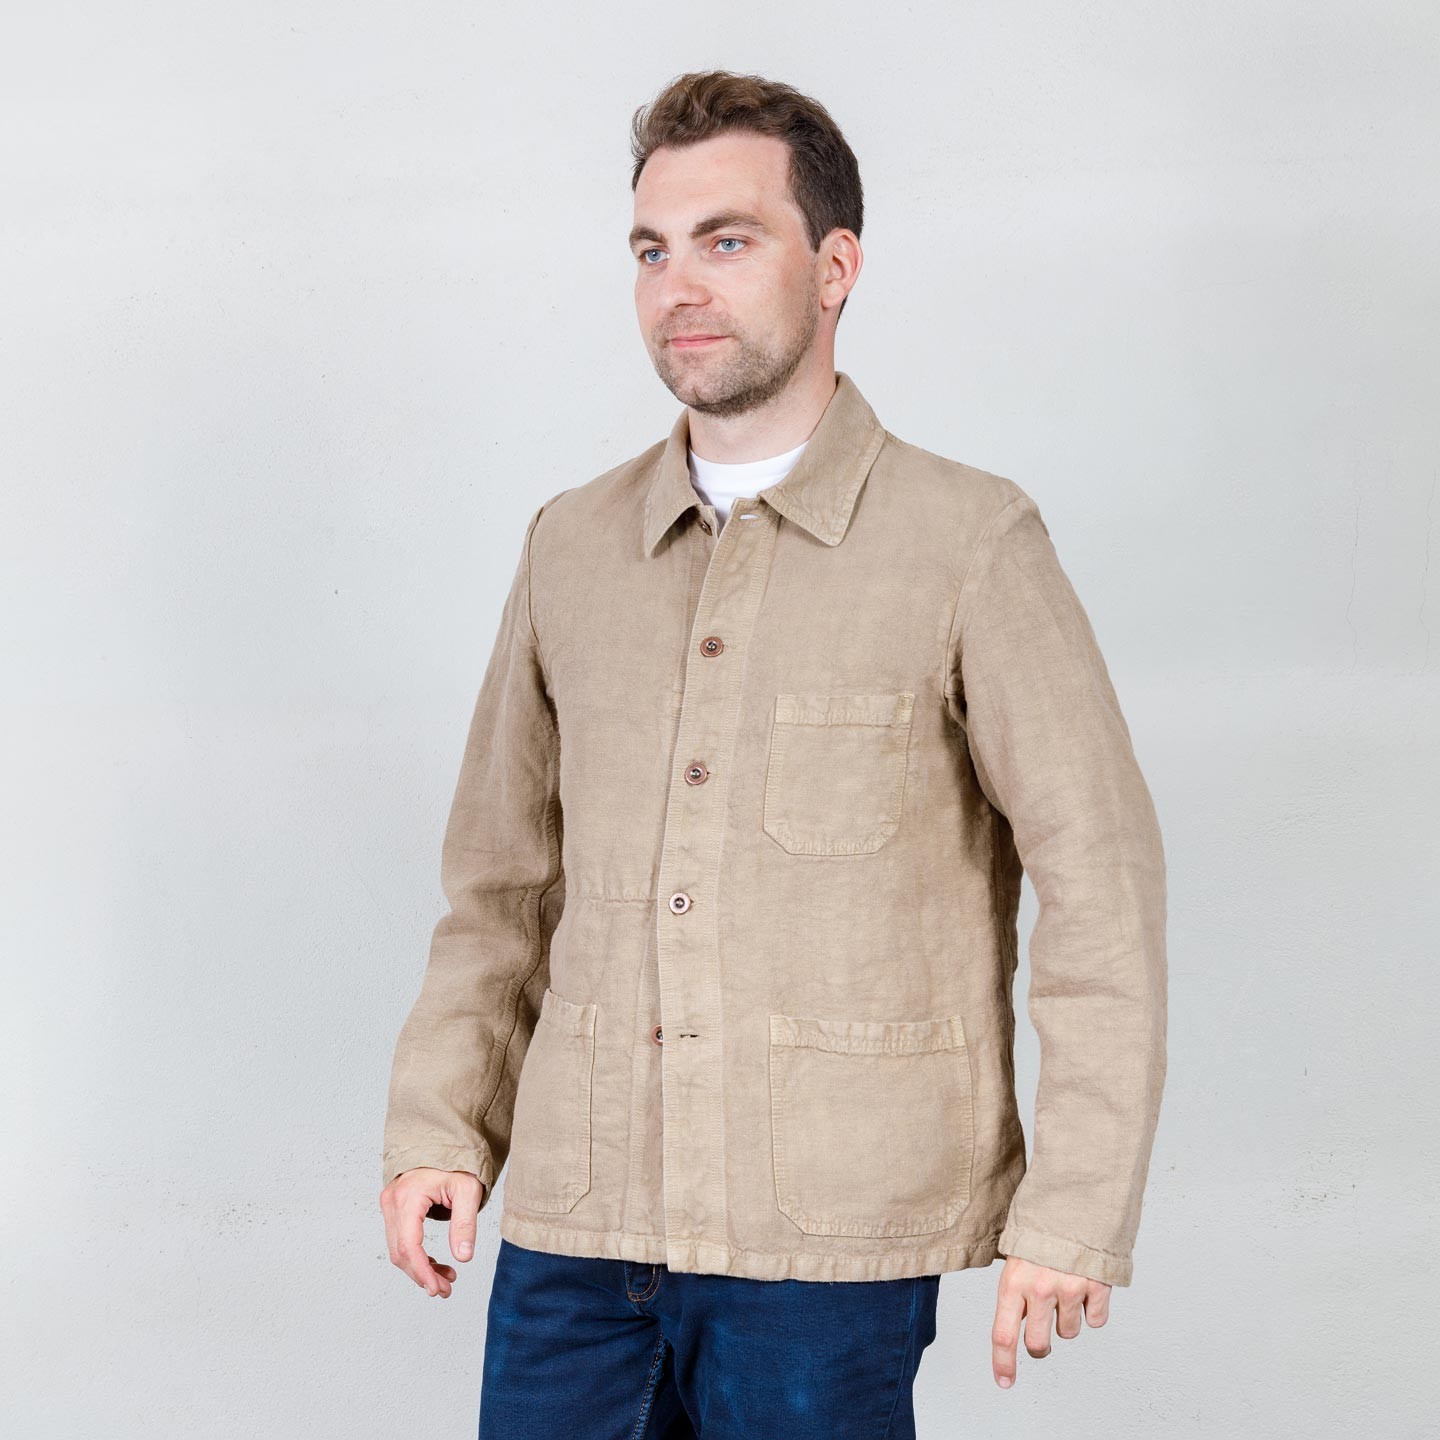 100% Linen rare workwear jacket - VETRA100% made in France since 1927